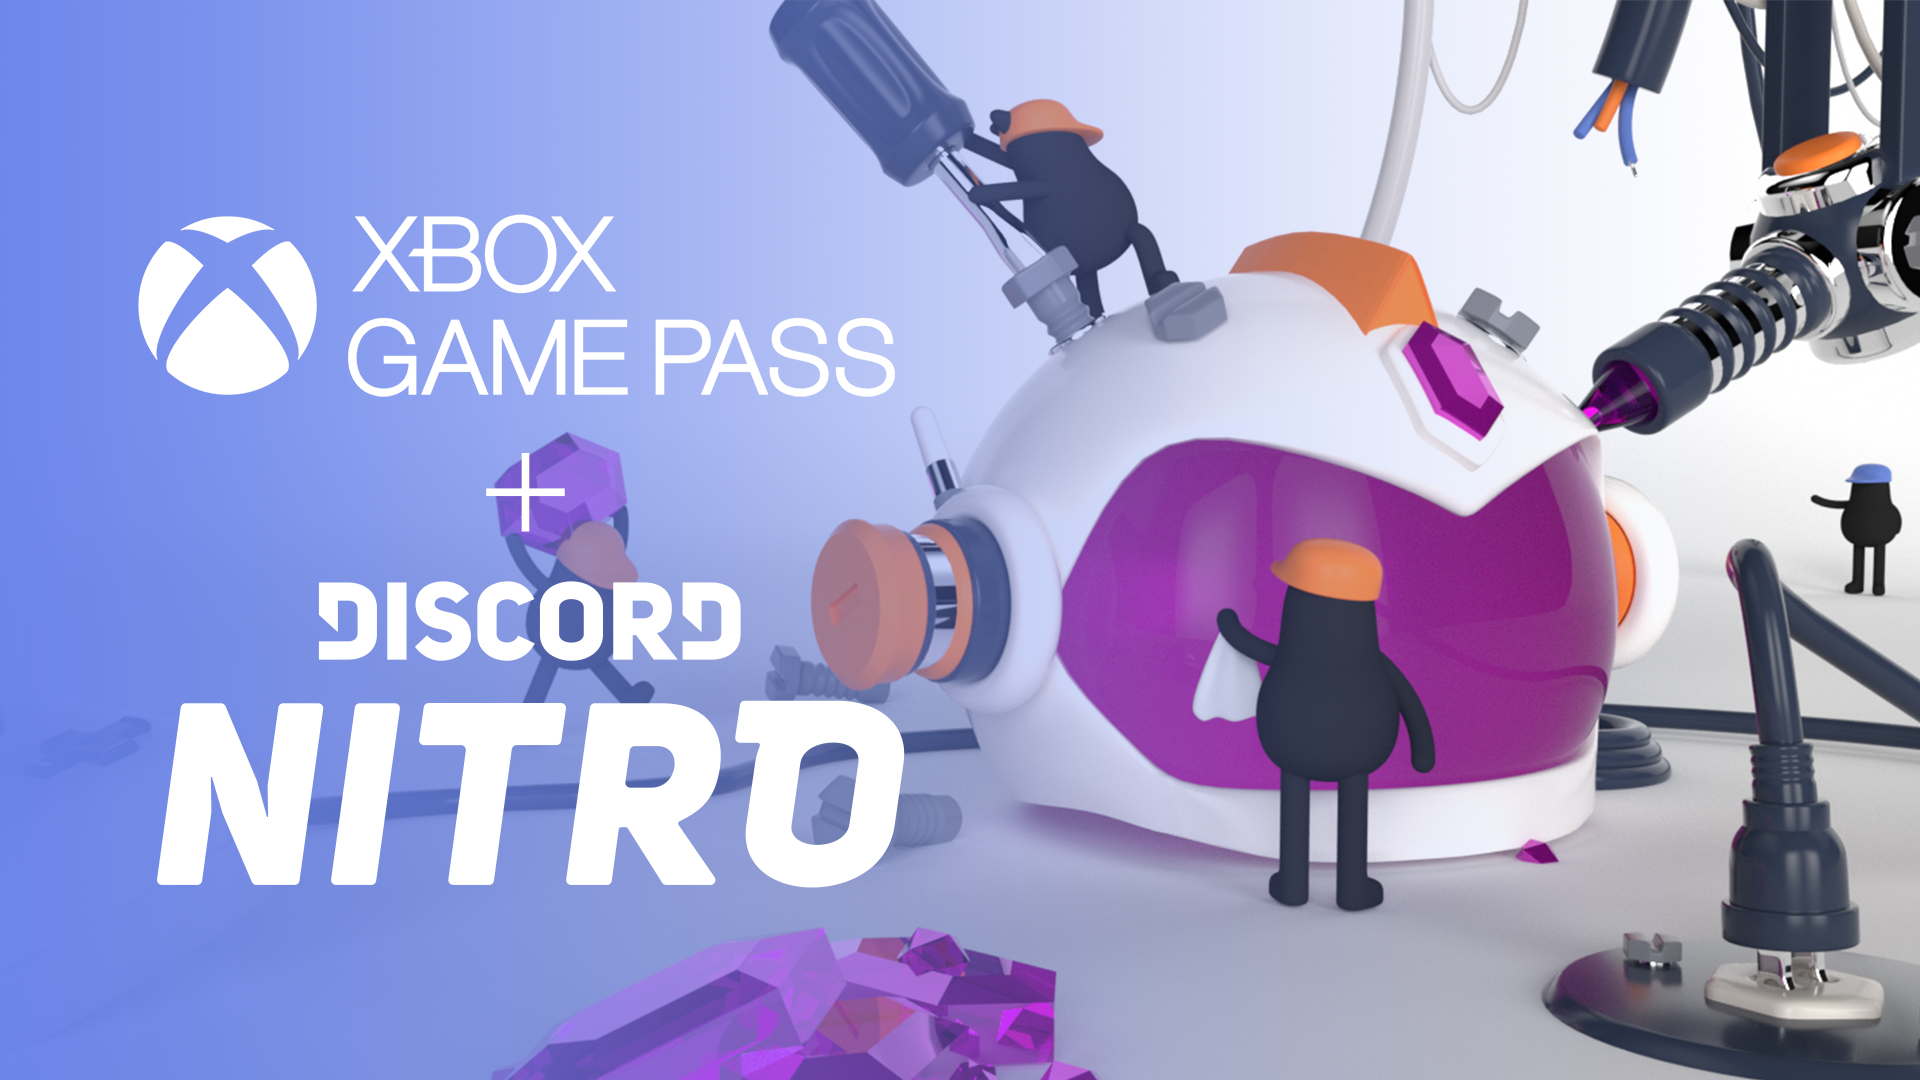 Today's your last day to get Xbox Game Pass through Discord Nitro